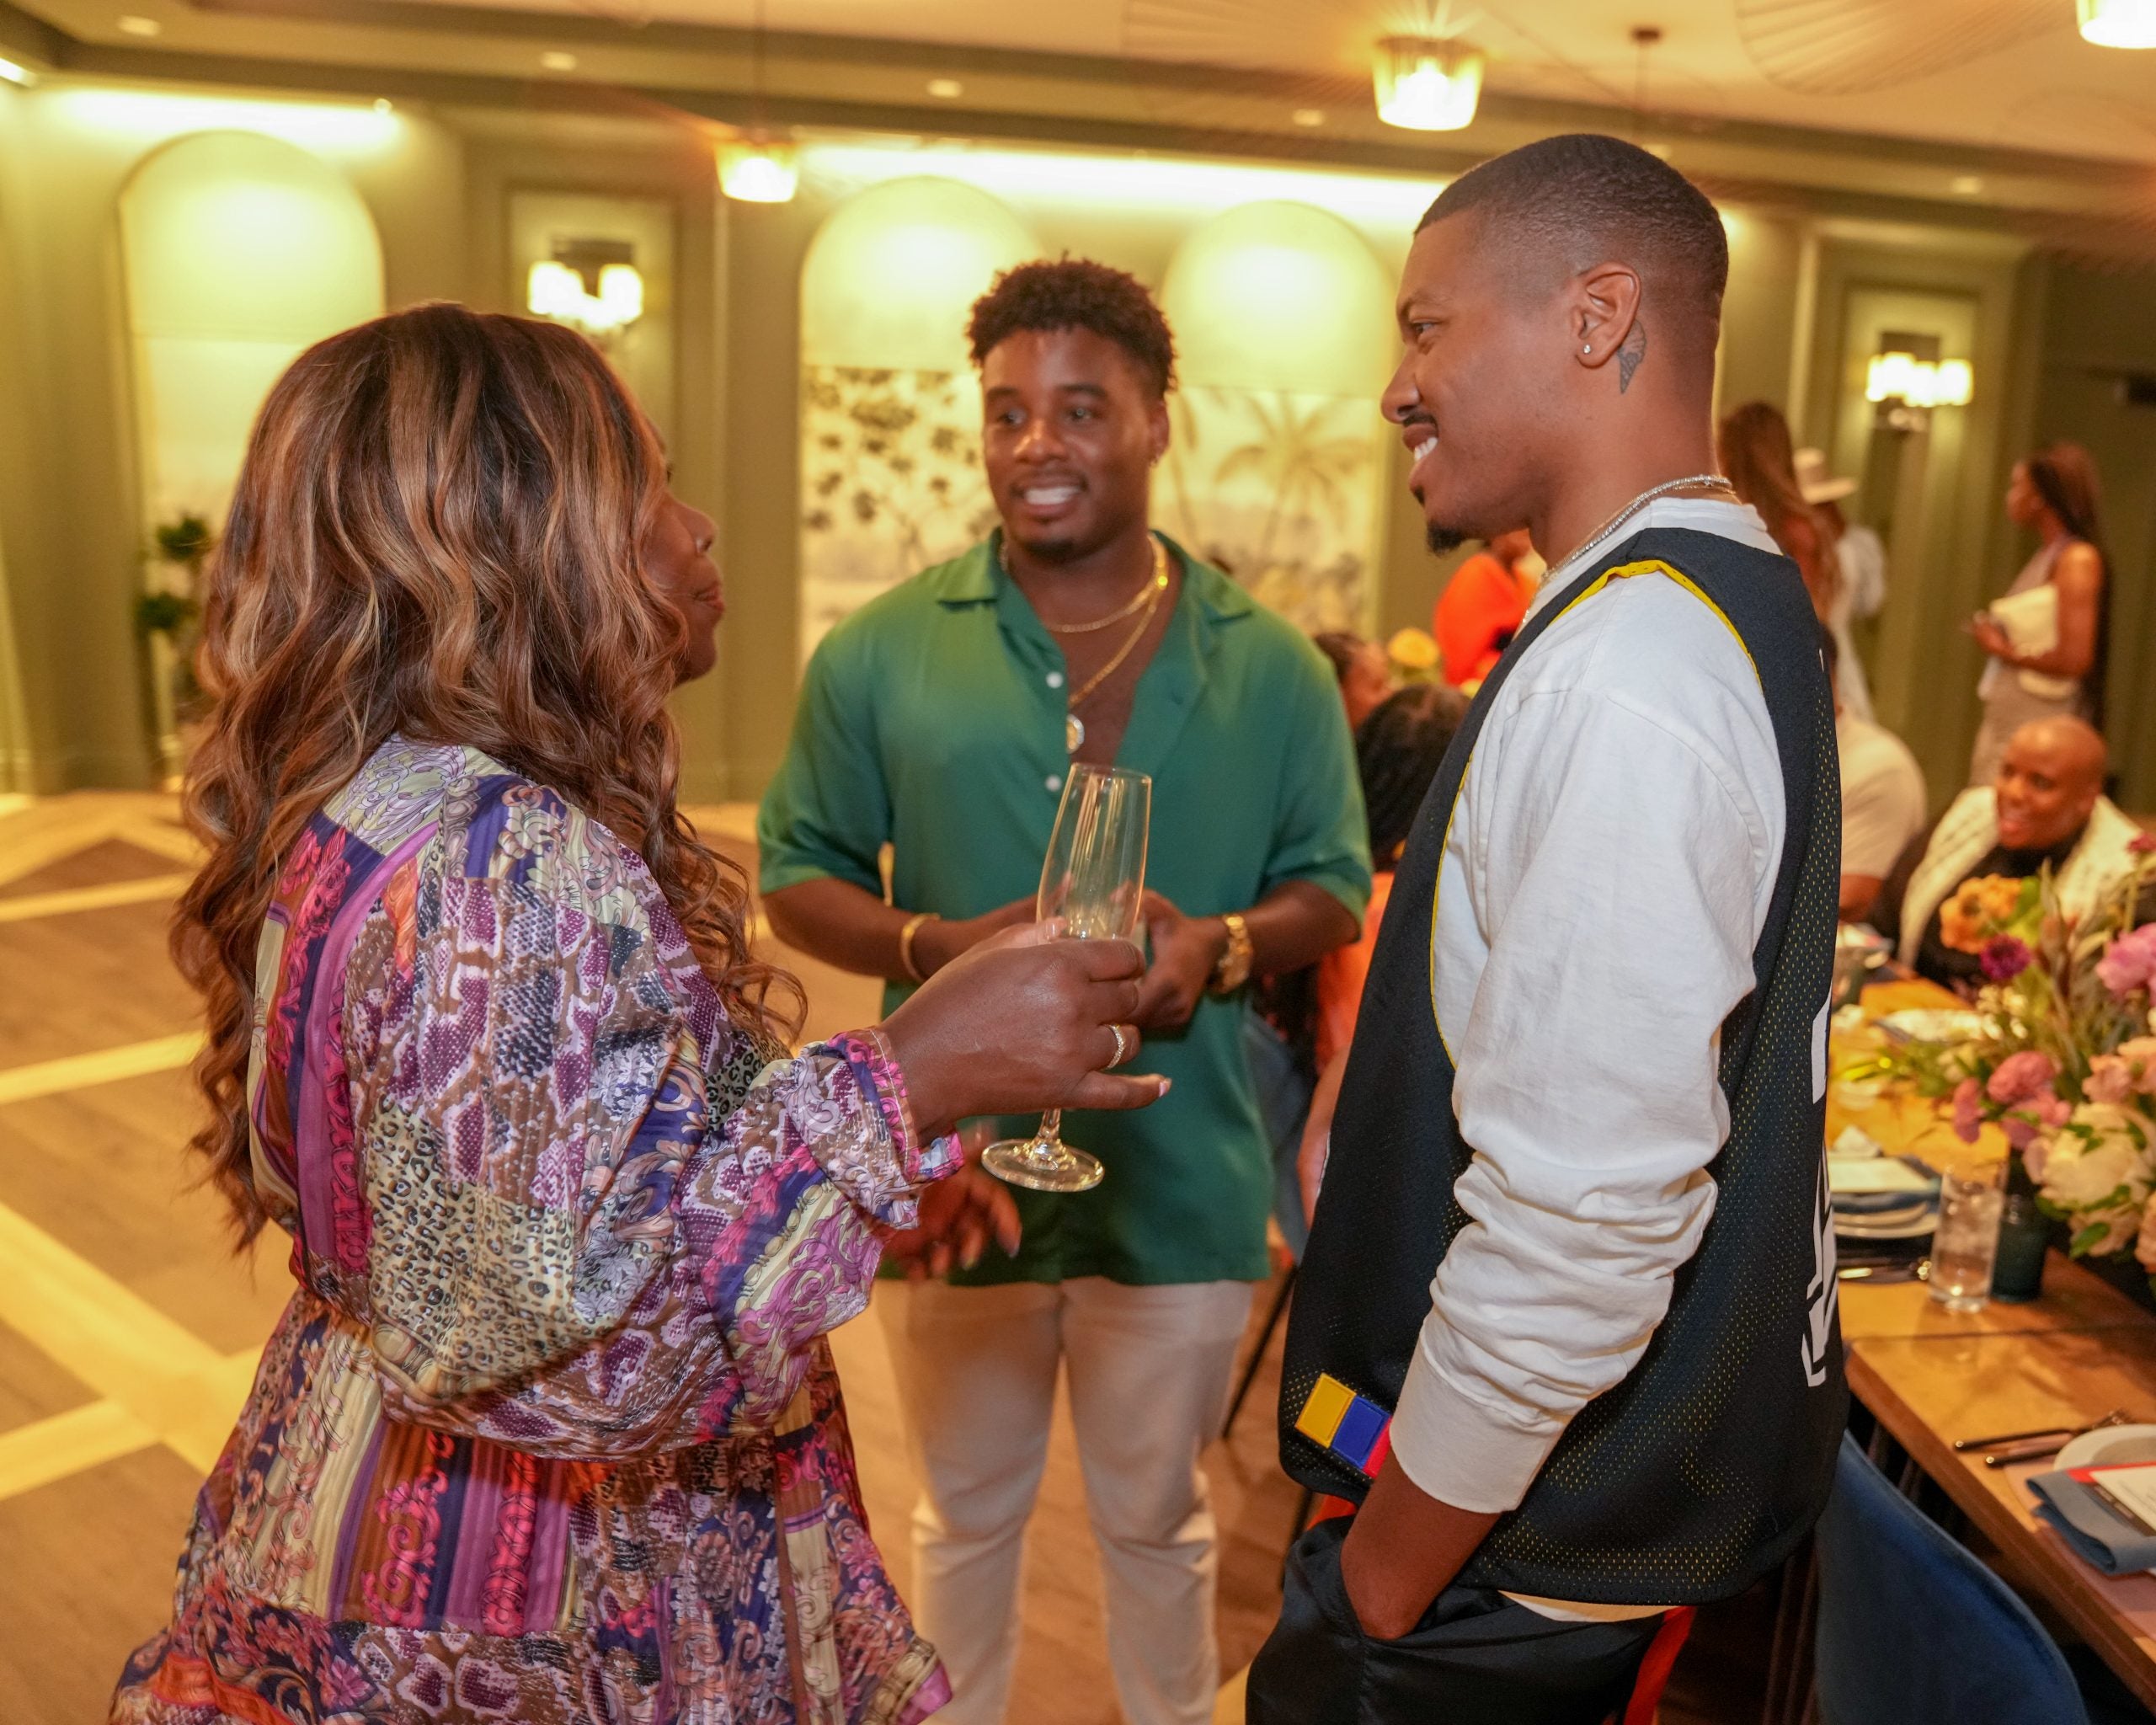 TikTok Hosts Visionary Voices Dinner At The ESSENCE Festival Of Culture